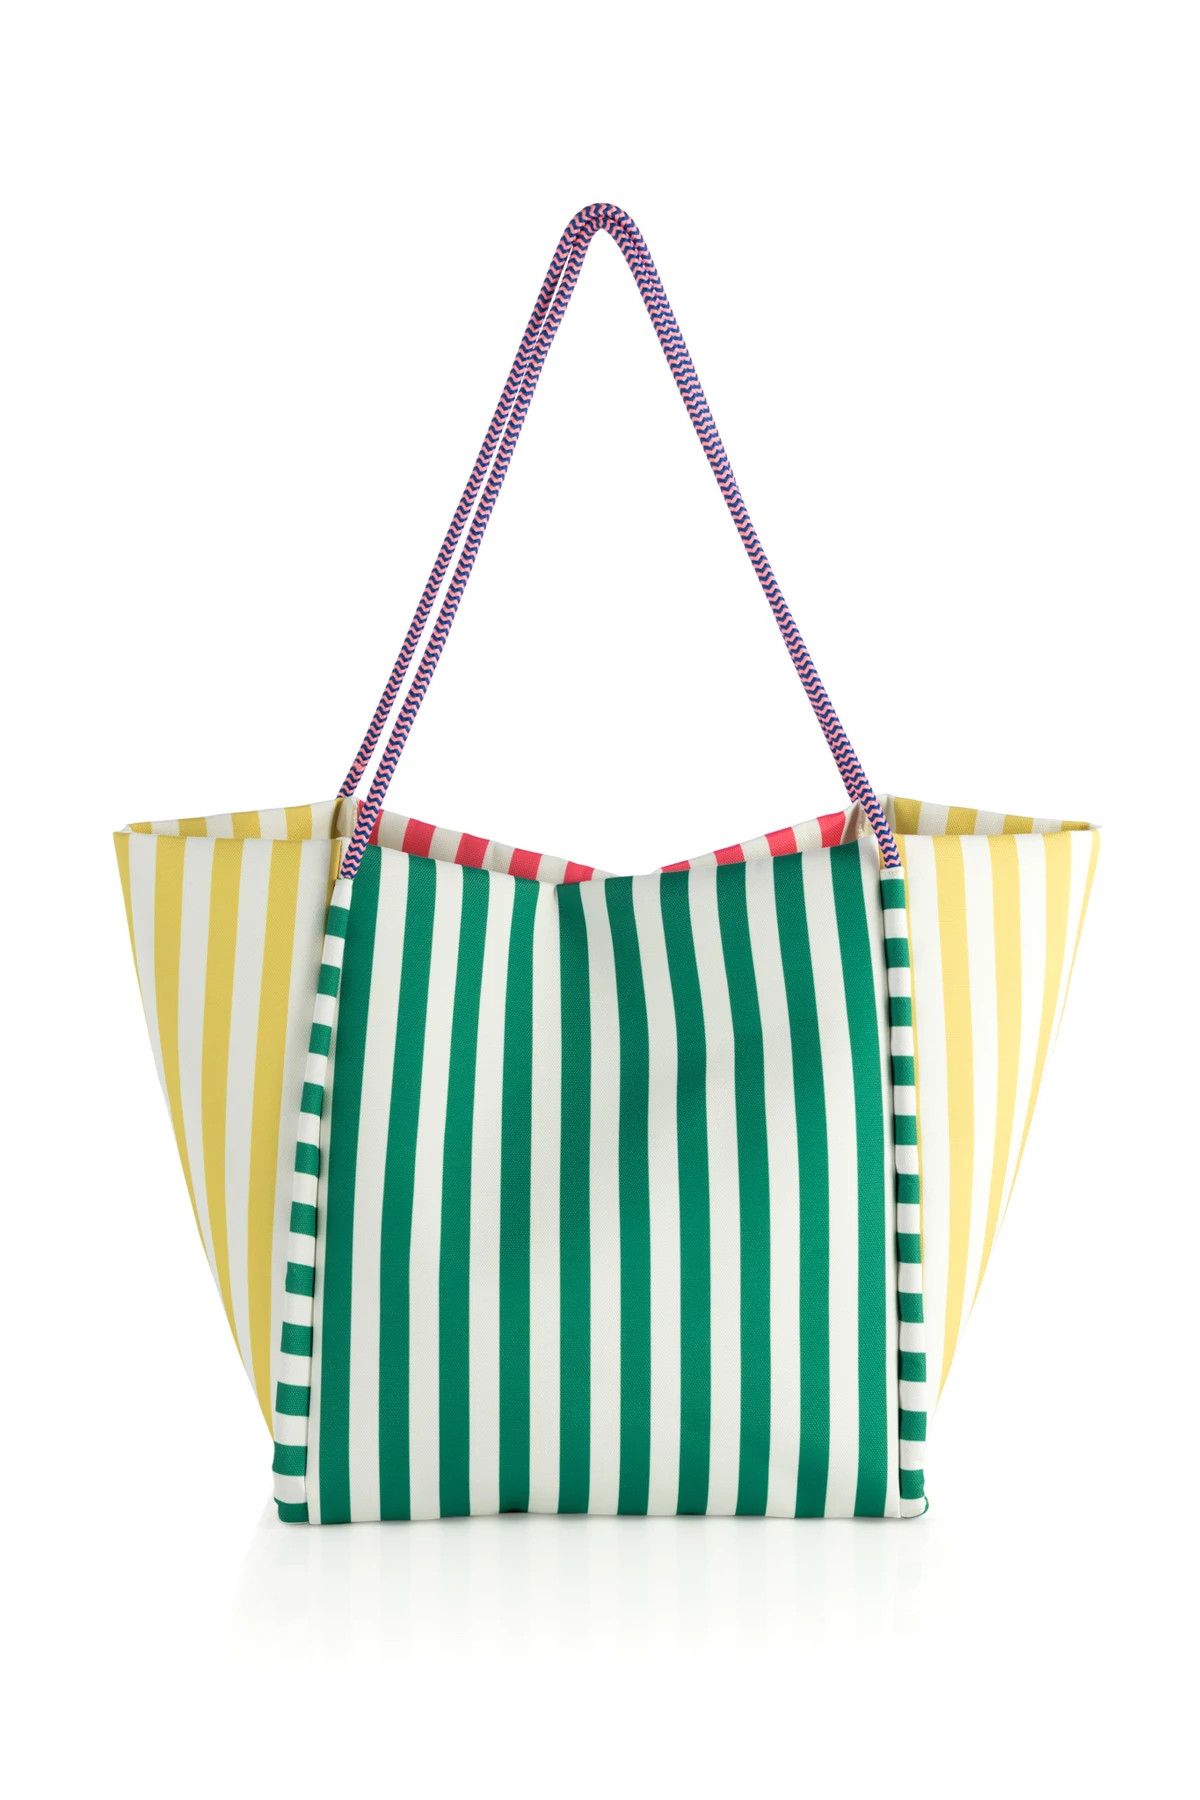 Spiaggia Stripe Tote | Everything But Water